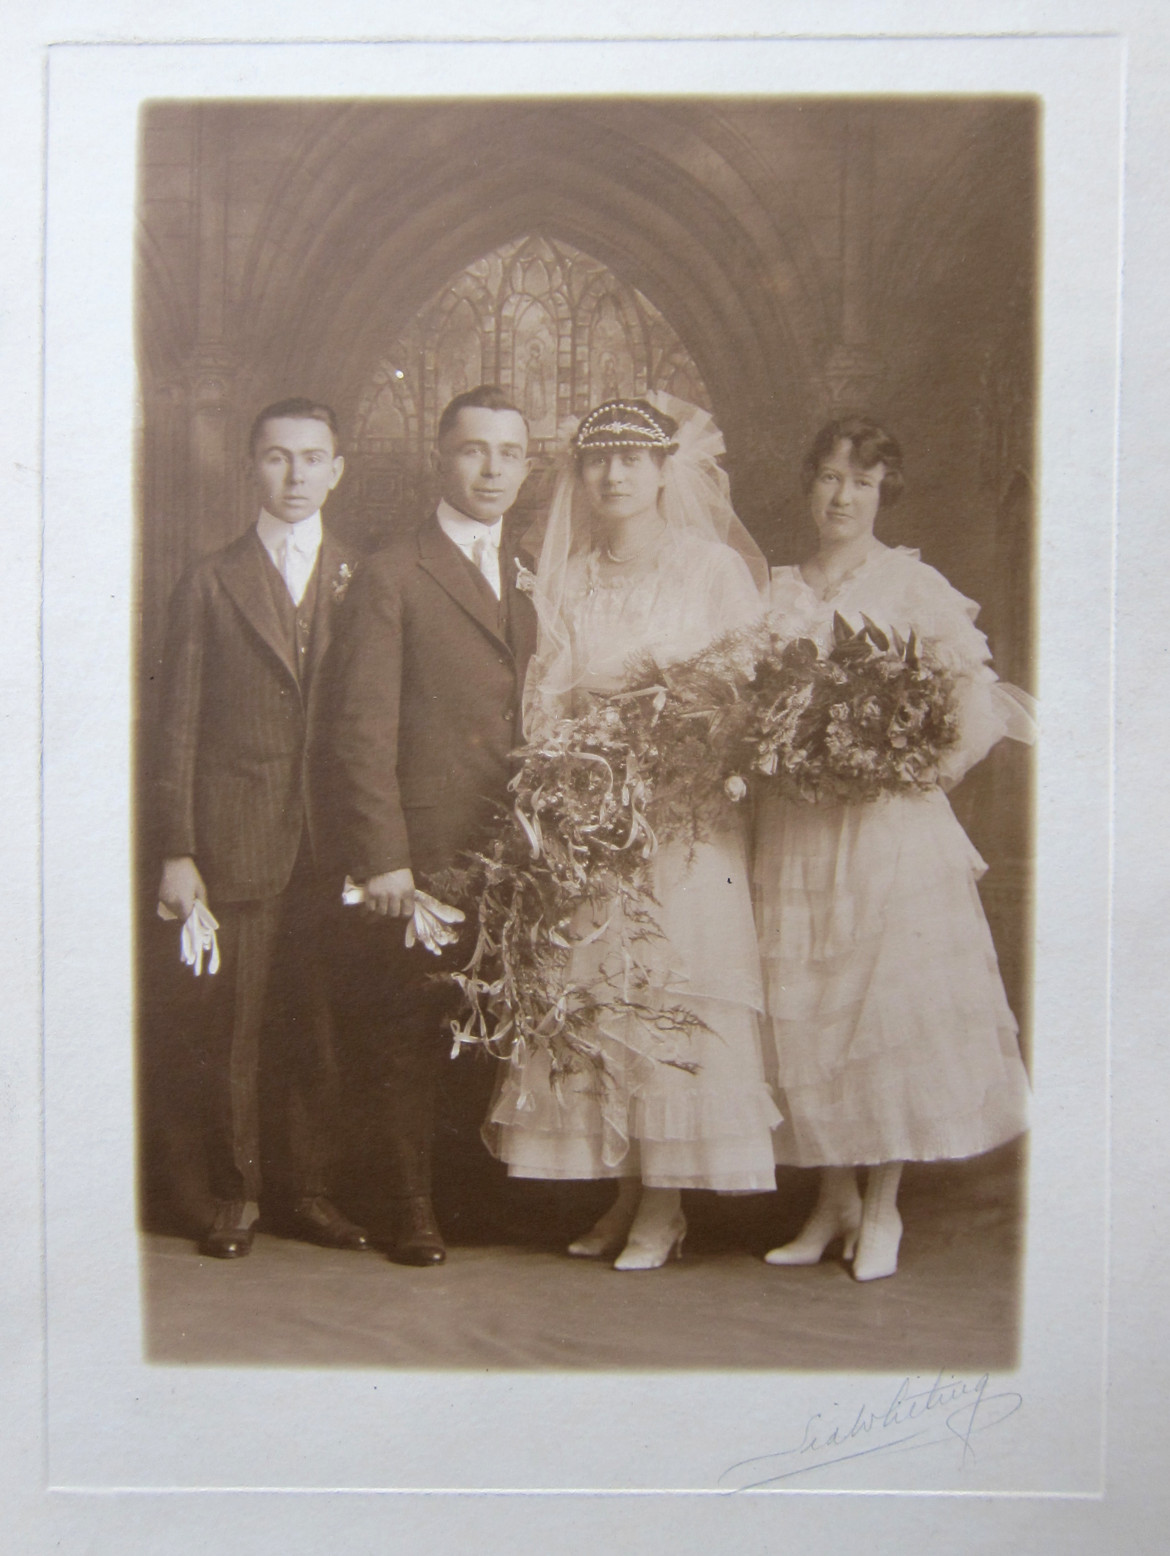 This is the wedding photo of Matt's great grandparents, Talitha Wuellner and Max Slavik.  They may have been the first owners of the home at 2855 Laclede Station Road.